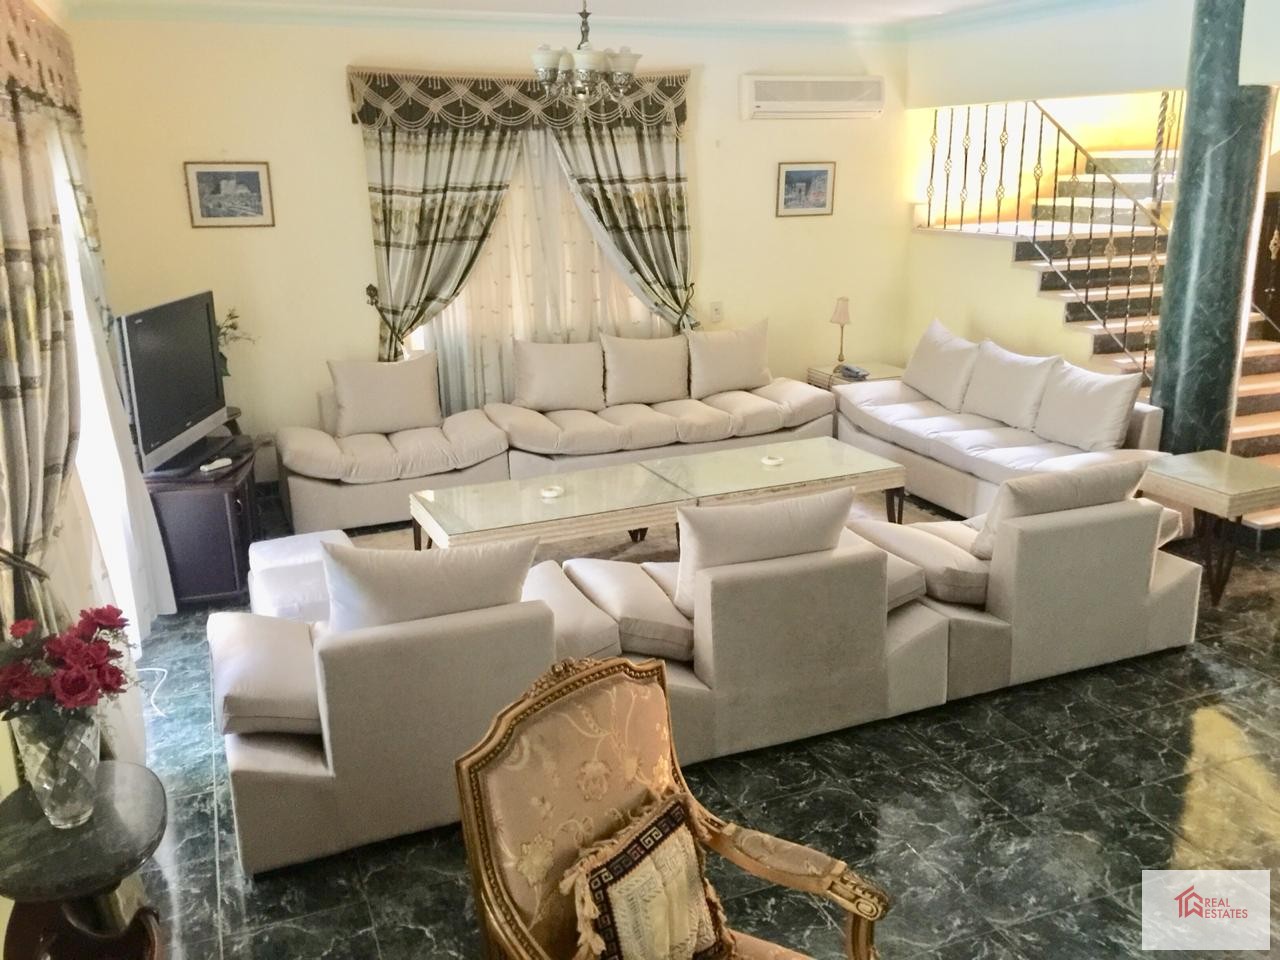 Villa for rent in October City in Dara Gardens Compound, fully furnished